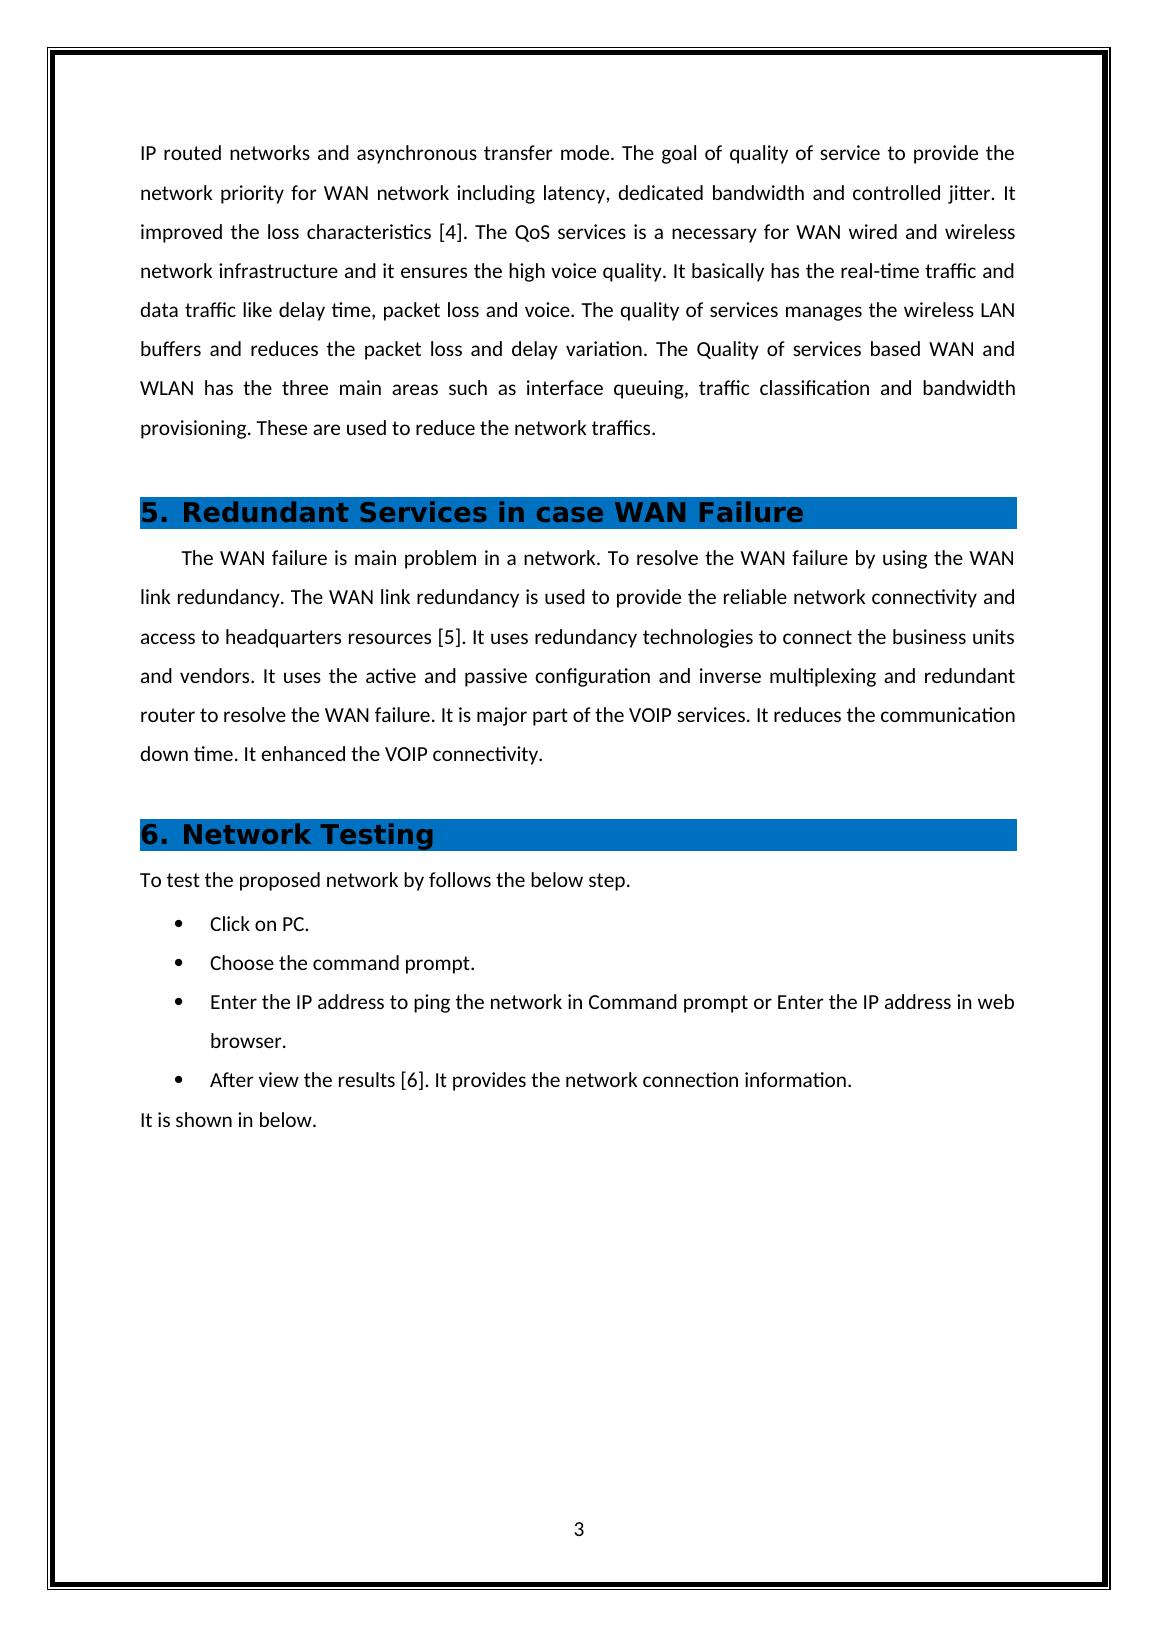 Company Business Requirement Network Project_4